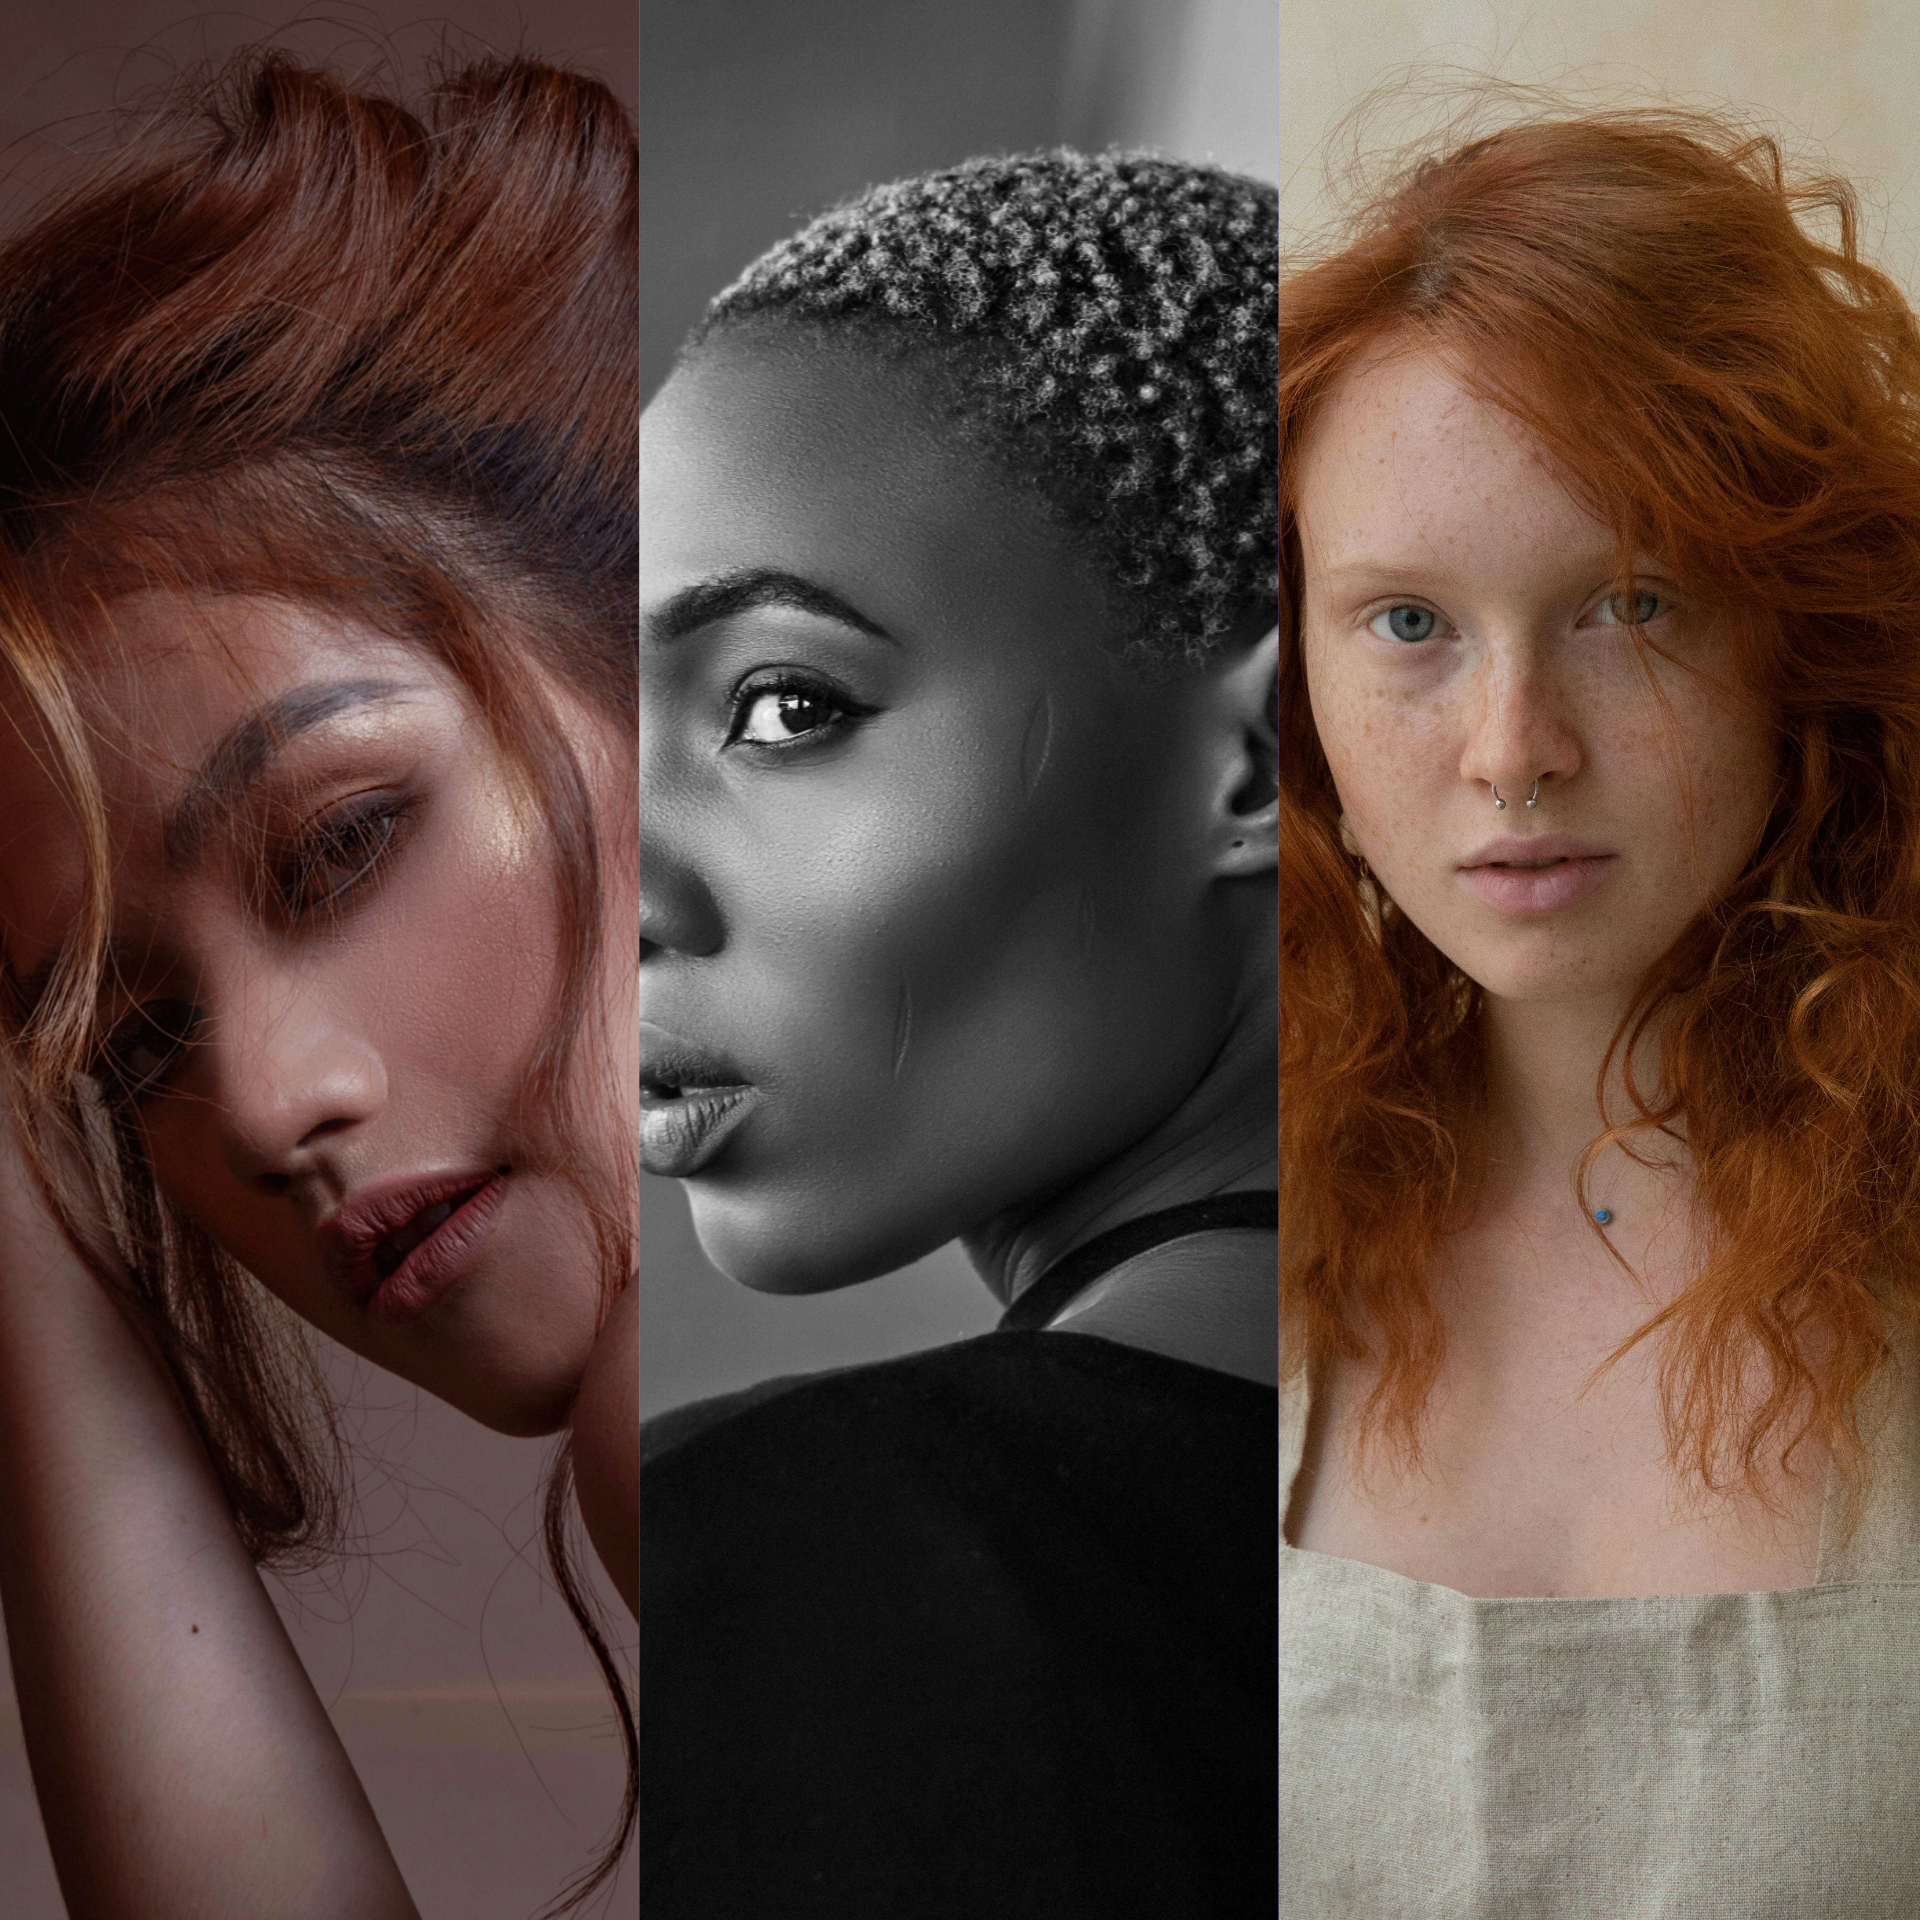 An inclusive photo showcasing different hair textures